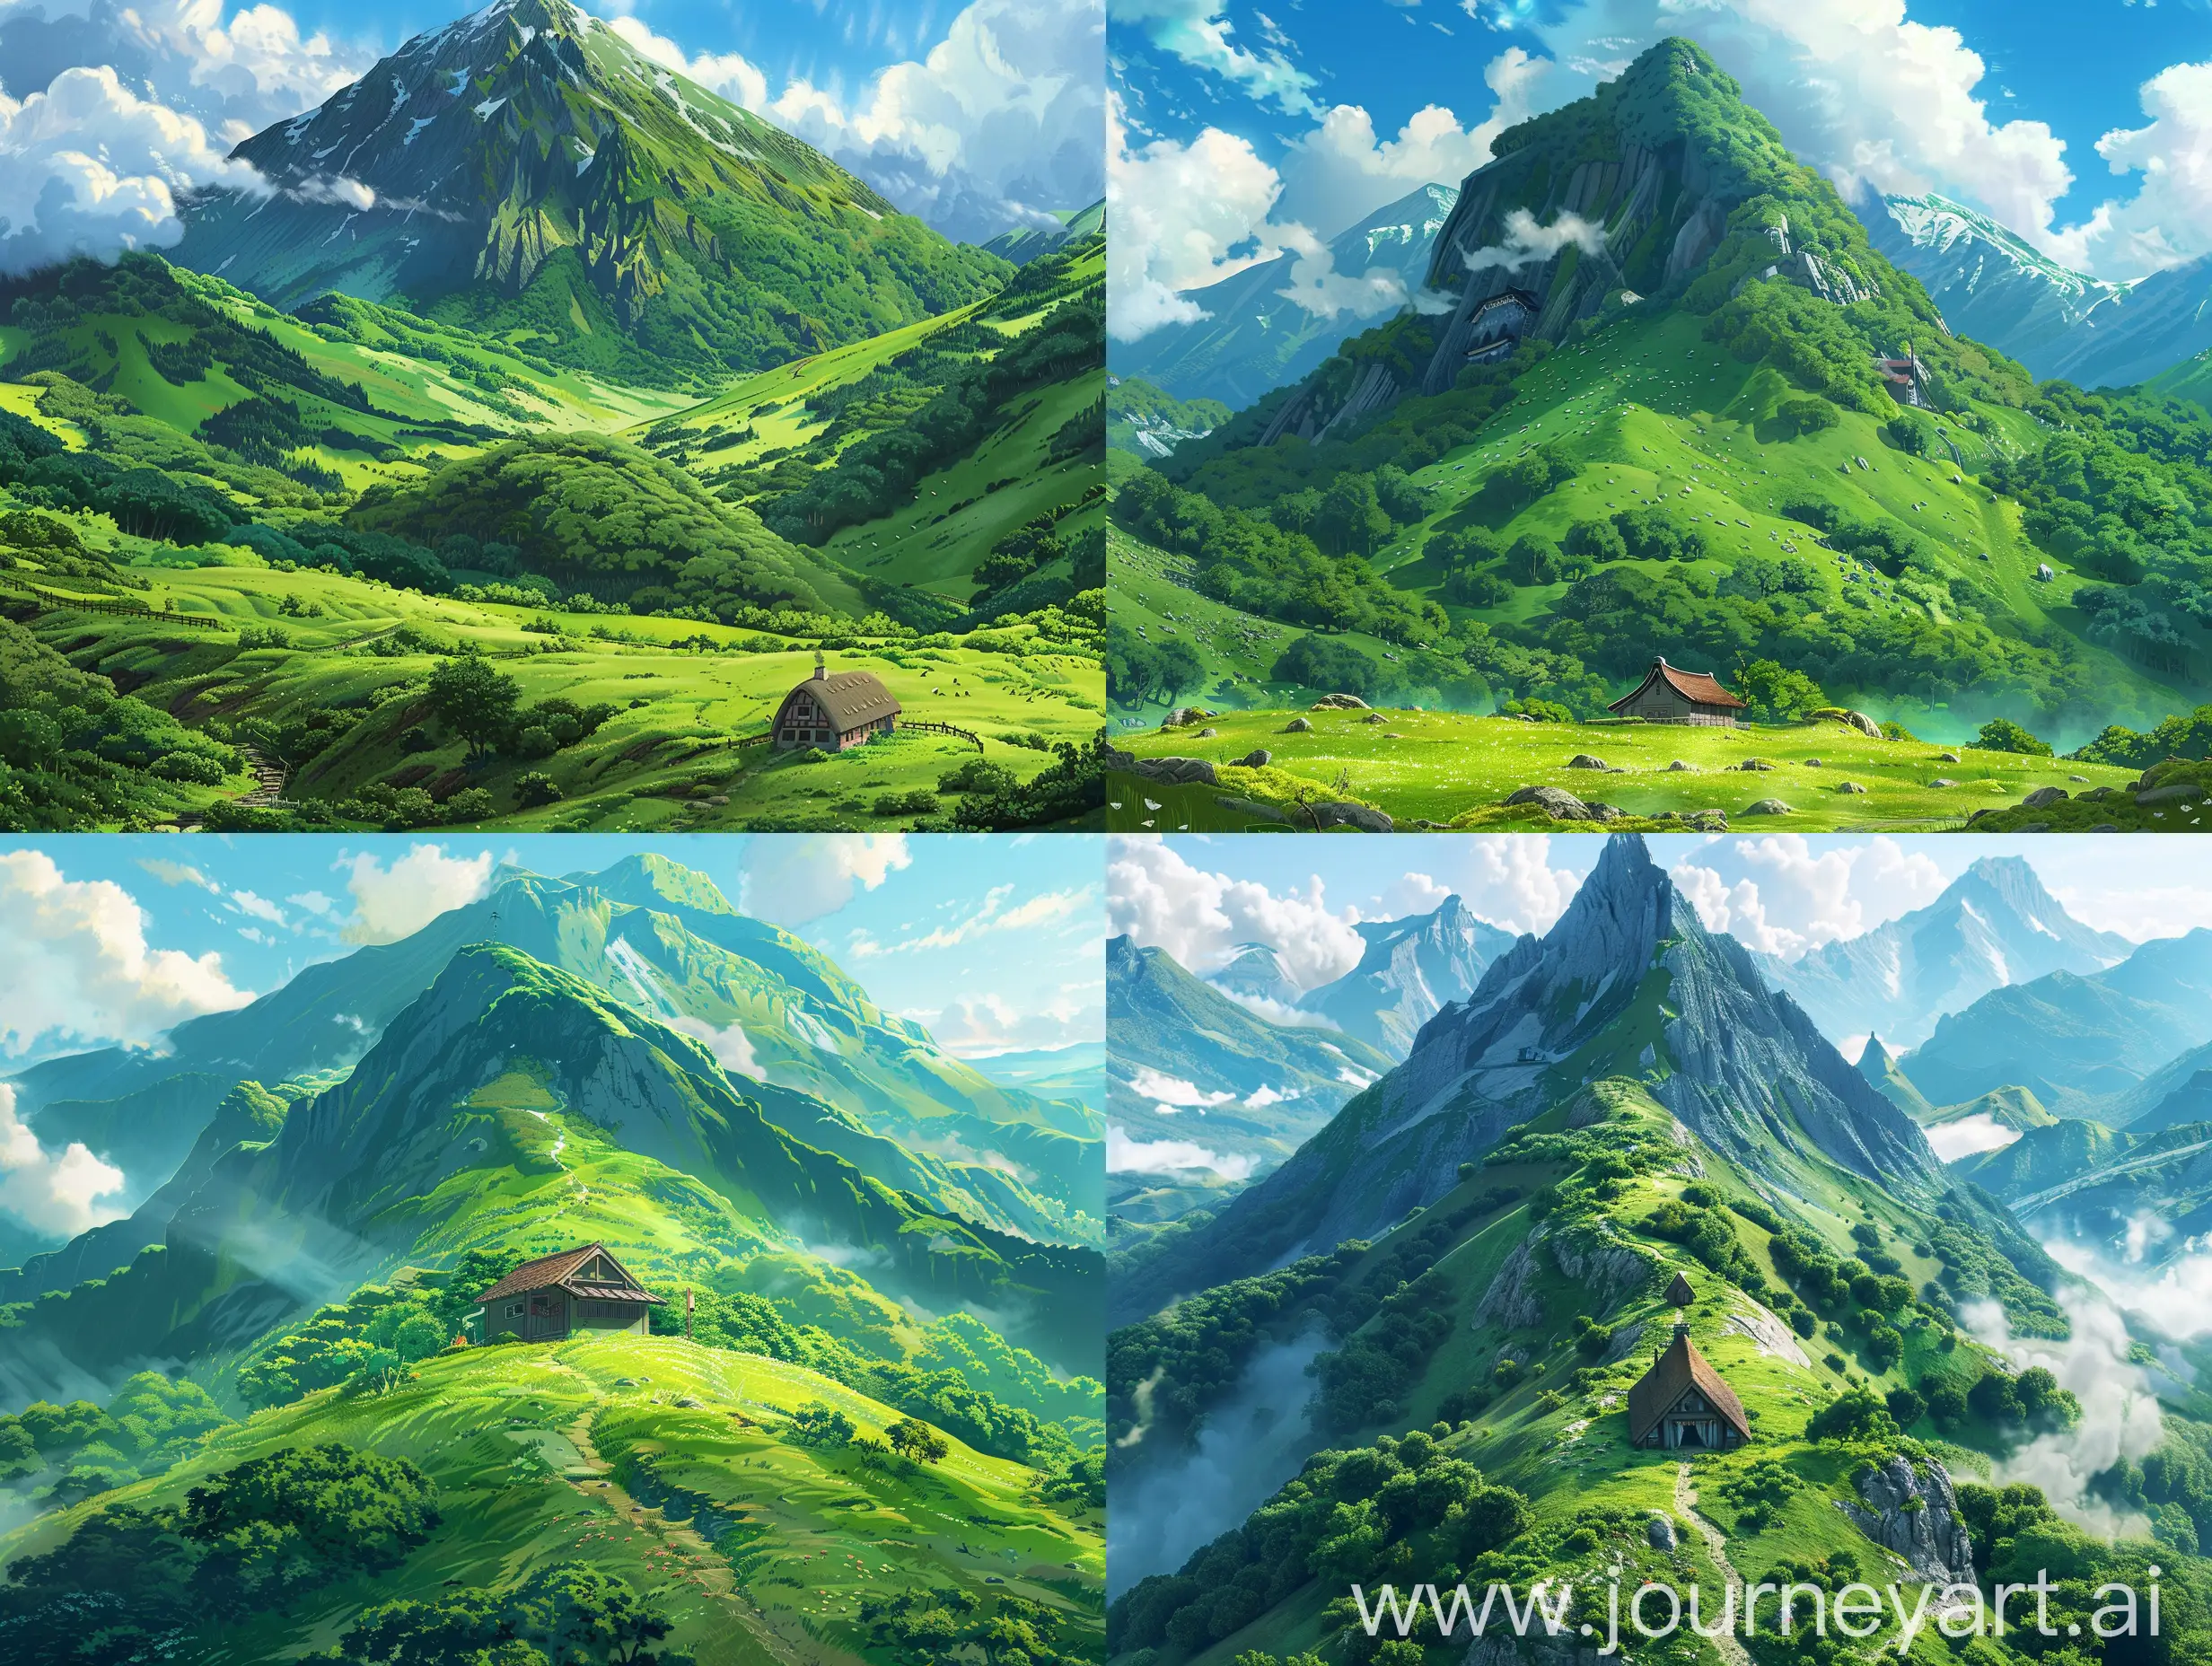 Tranquil-Studio-Ghibli-Style-Landscape-Green-Mountain-and-Small-House-Centerpiece